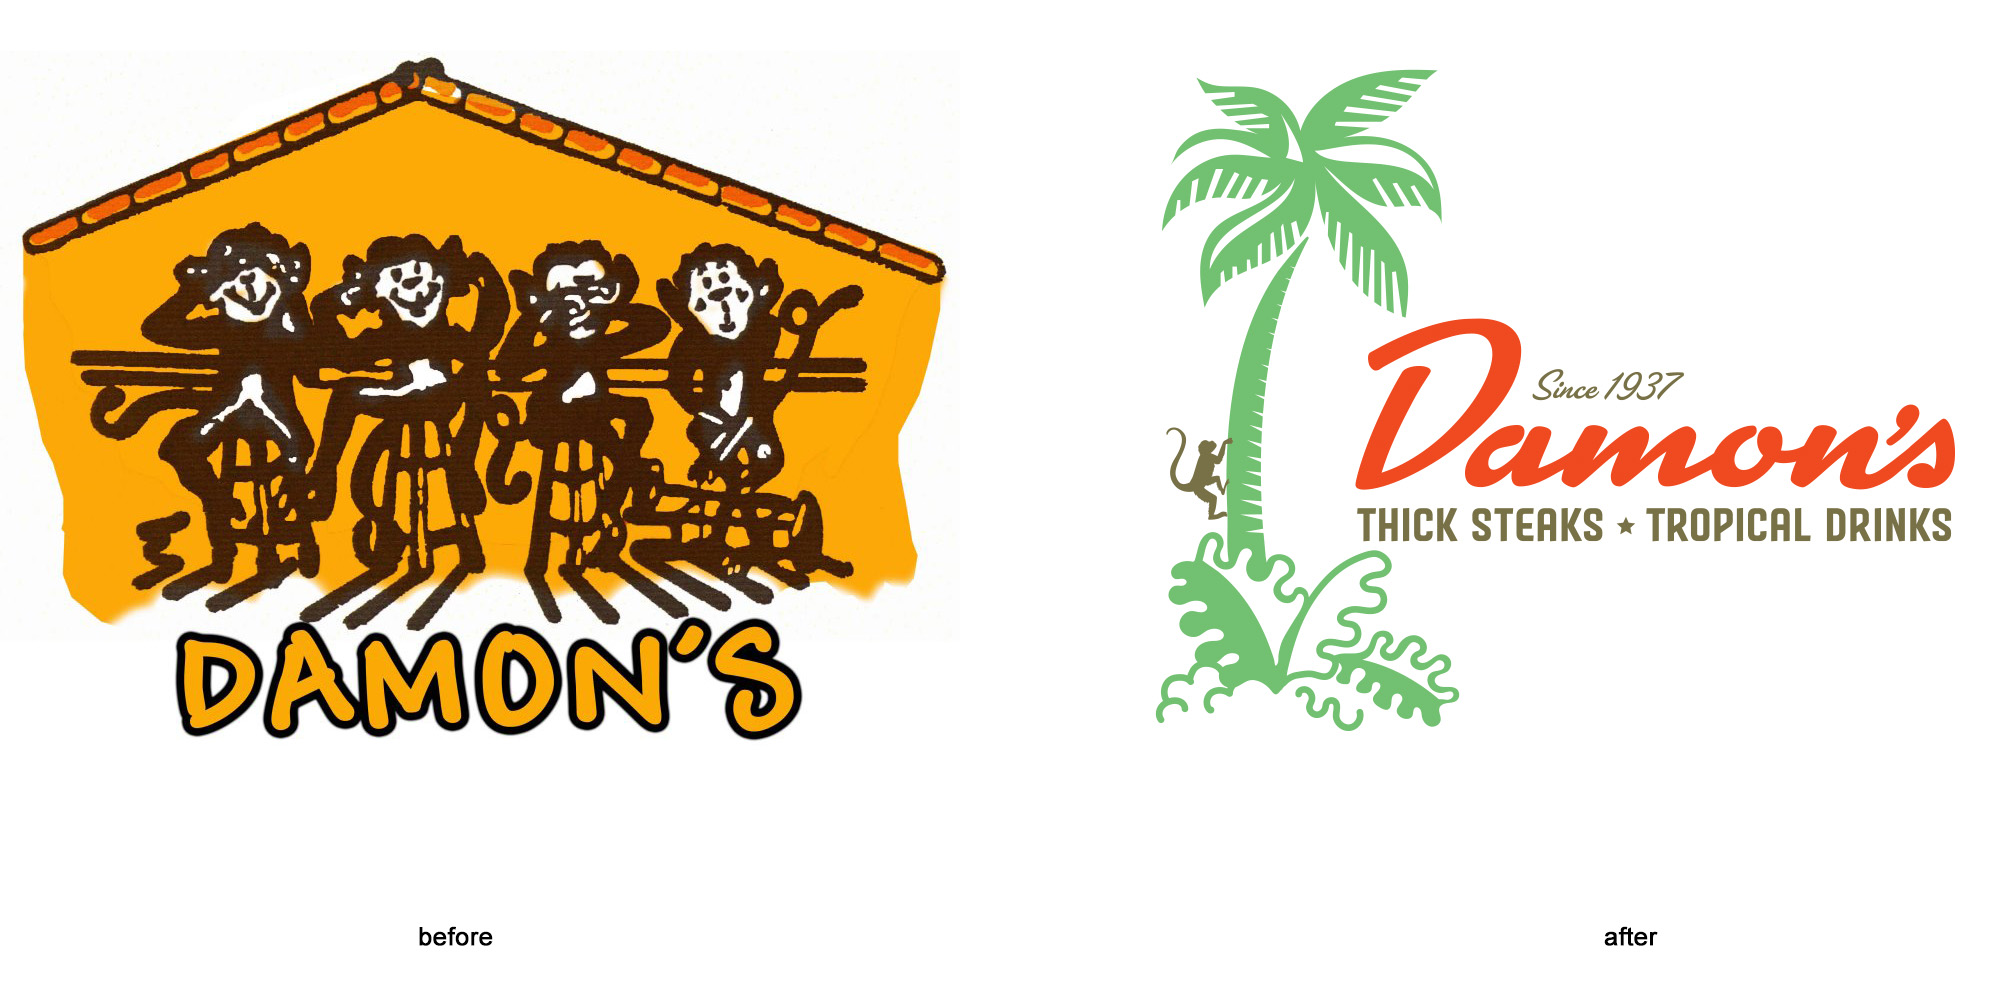 Before & after logos for Damon's in Glendale by Wexler of California